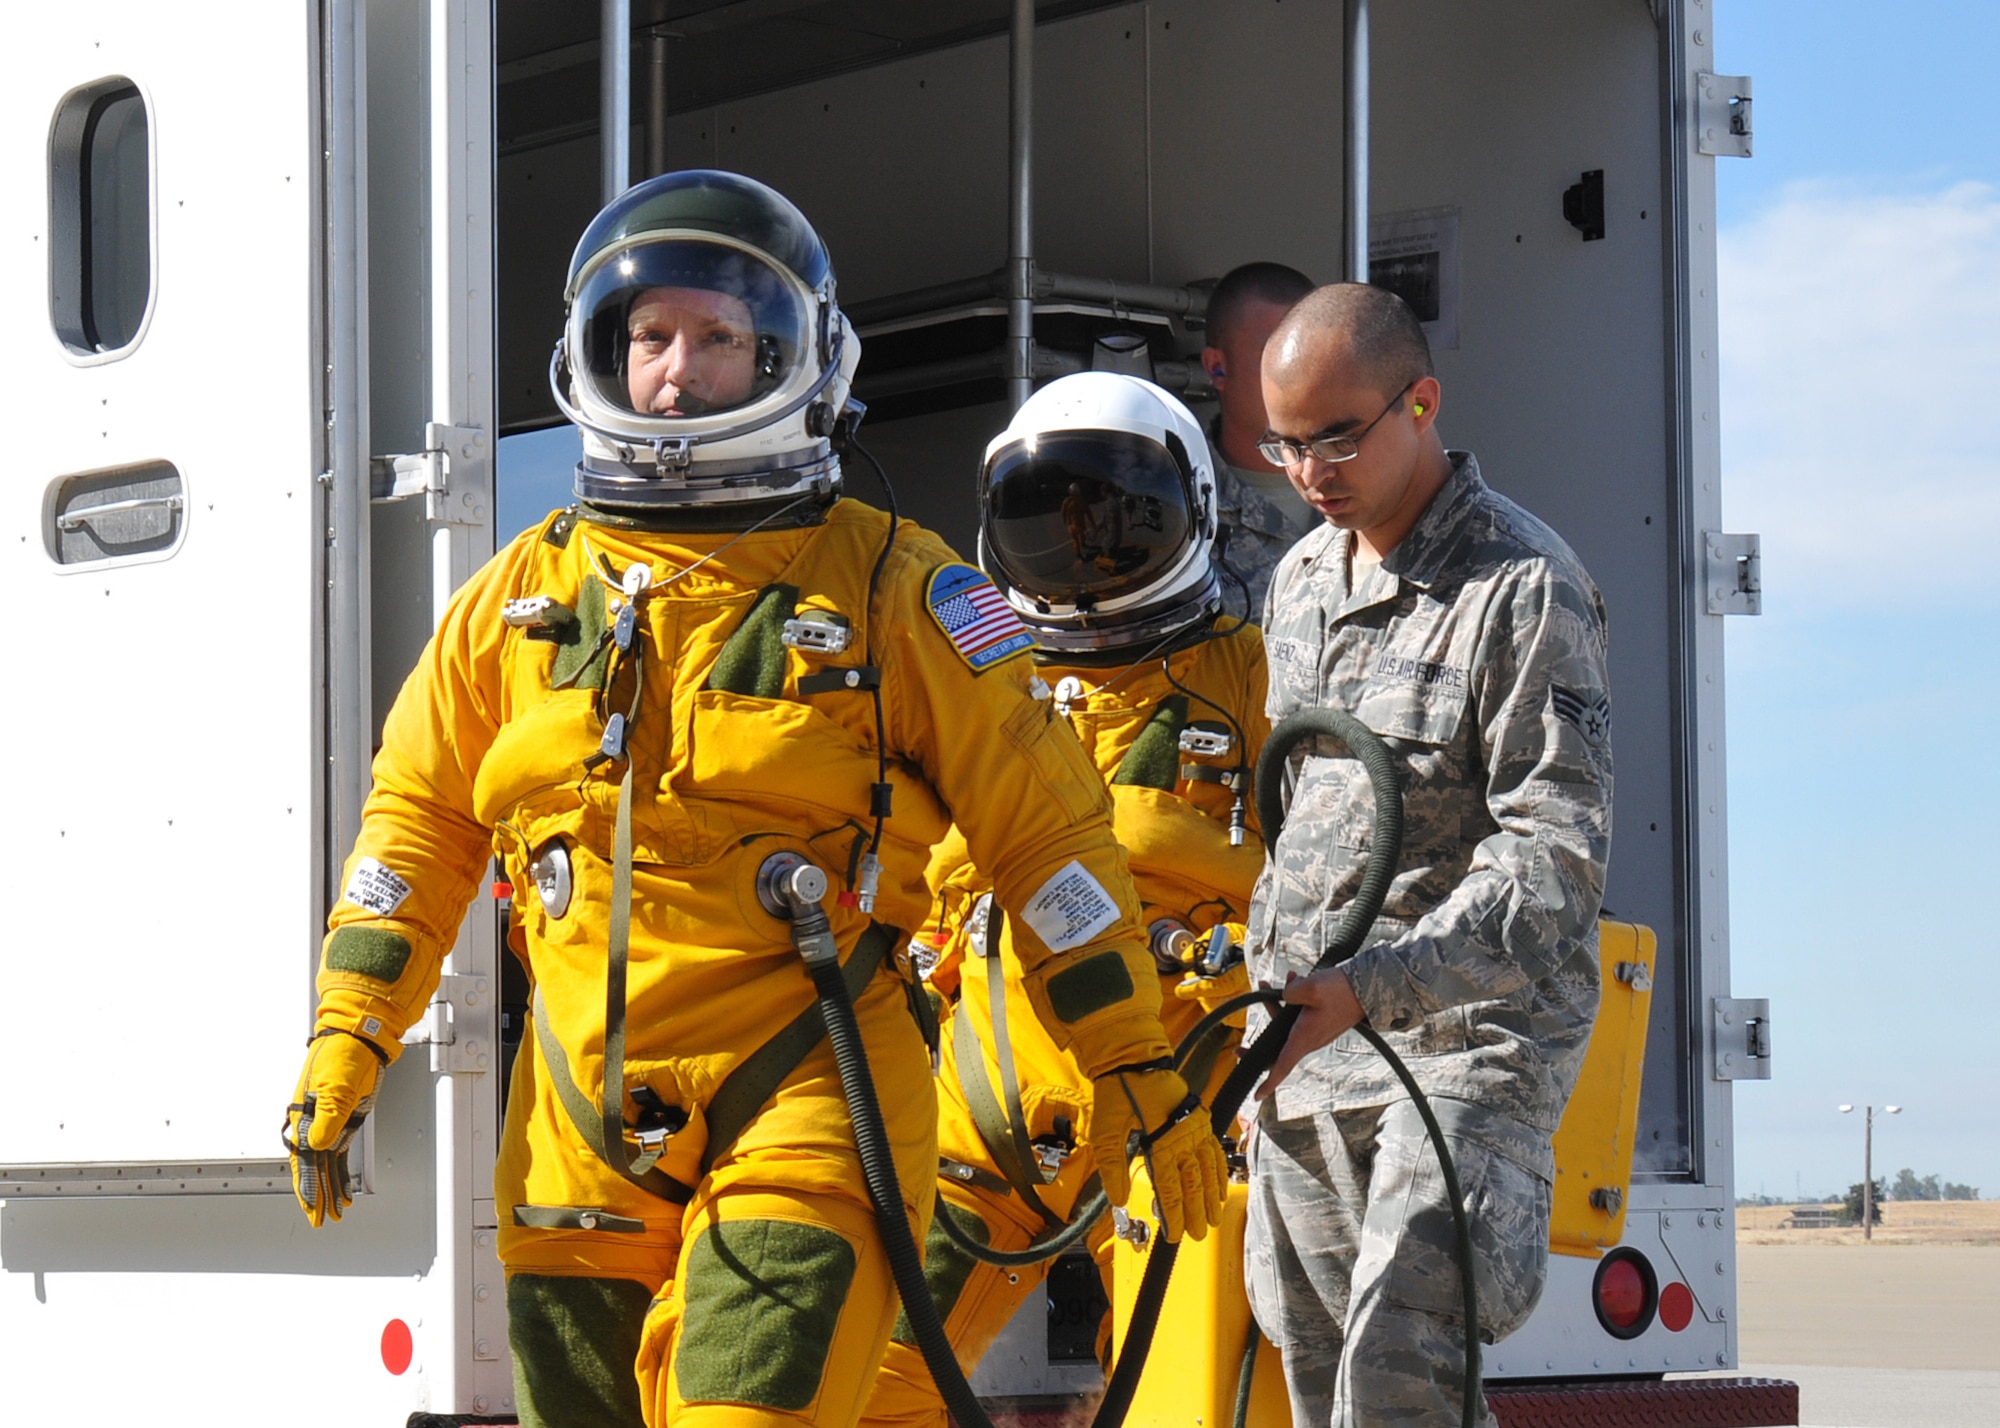 Secretary of the Air Force Deborah Lee James (left), walks to a U-2 Dragon Lady as Senior Airman Aaron Saenz, 9th Physiological Support Squadron launch and recovery technician, carries high-altitude pressure suit auxiliary equipment at Beale Air Force Base, California, Aug. 11, 2015. The specialized pressure suit allows U-2 pilots to safely fly at altitudes reaching 70,000 feet. James visited Beale to receive a first-hand perspective of high-altitude intelligence, surveillance and reconnaissance from collection to dissemination. (U.S. Air Force photo by Senior Airman Dana J. Cable)